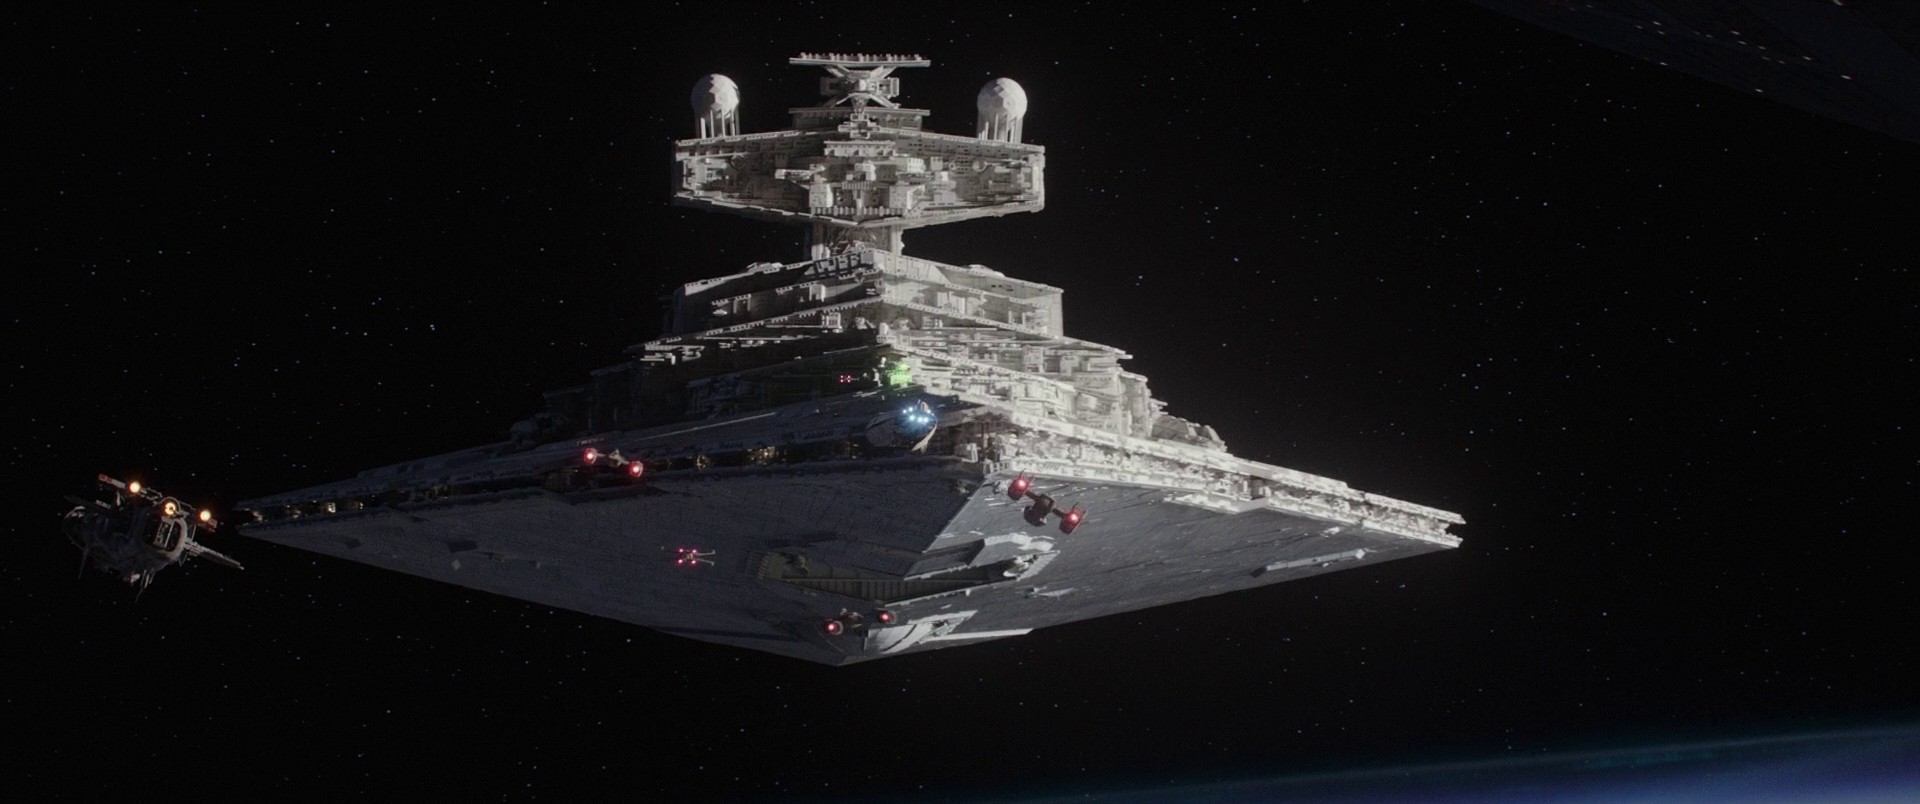 Star Wars Star Destroyer Rogue One A Star Wars Story Spaceship Imperial Forces Movies Science Fictio 1920x804